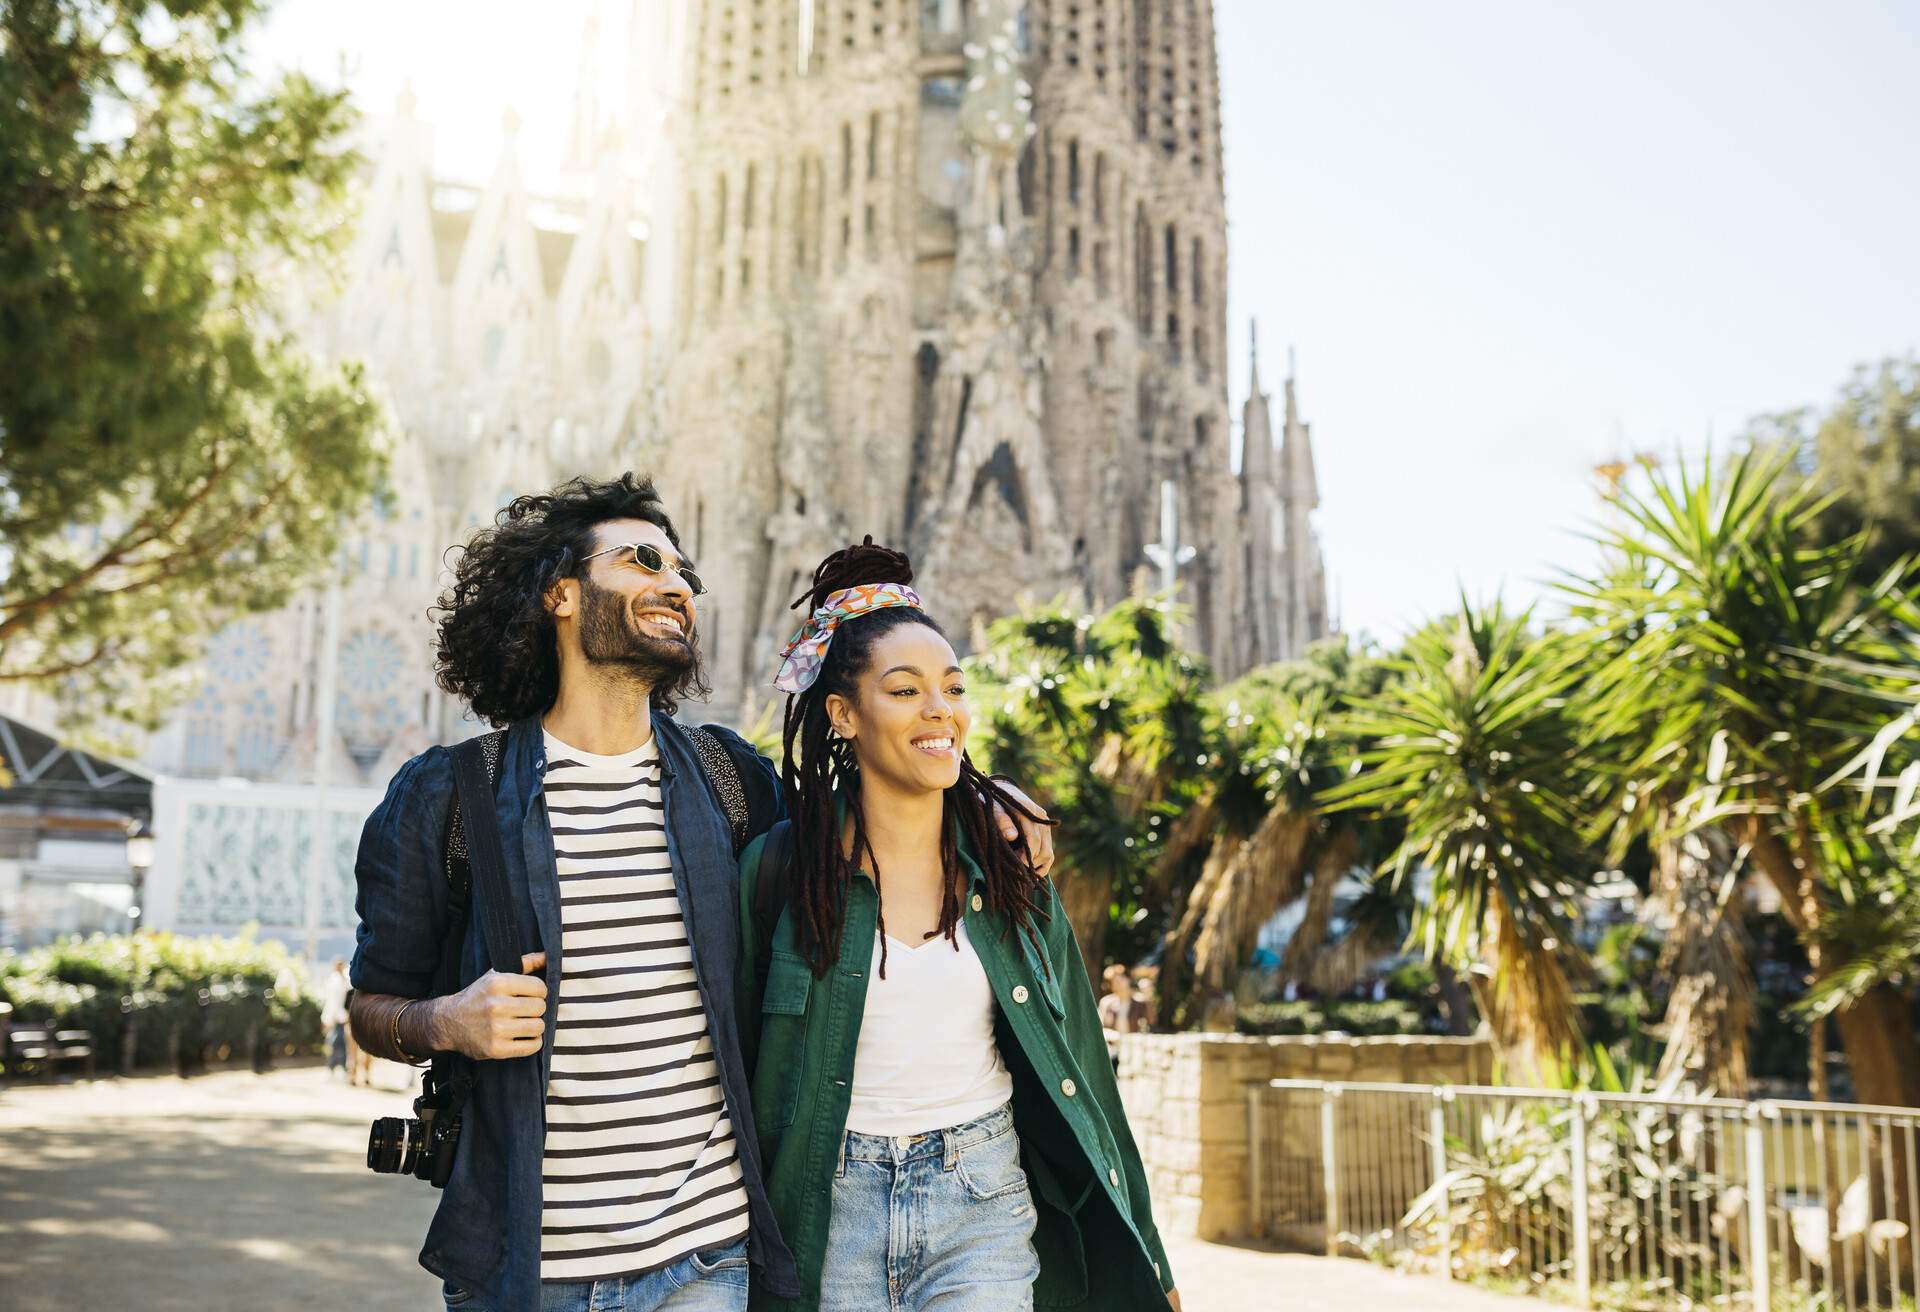 dest_spain_barcelona_sagrada_familia_people_woman_man_couple_gettyimages-1383055827_universal_within-usage-period_89469.jpg